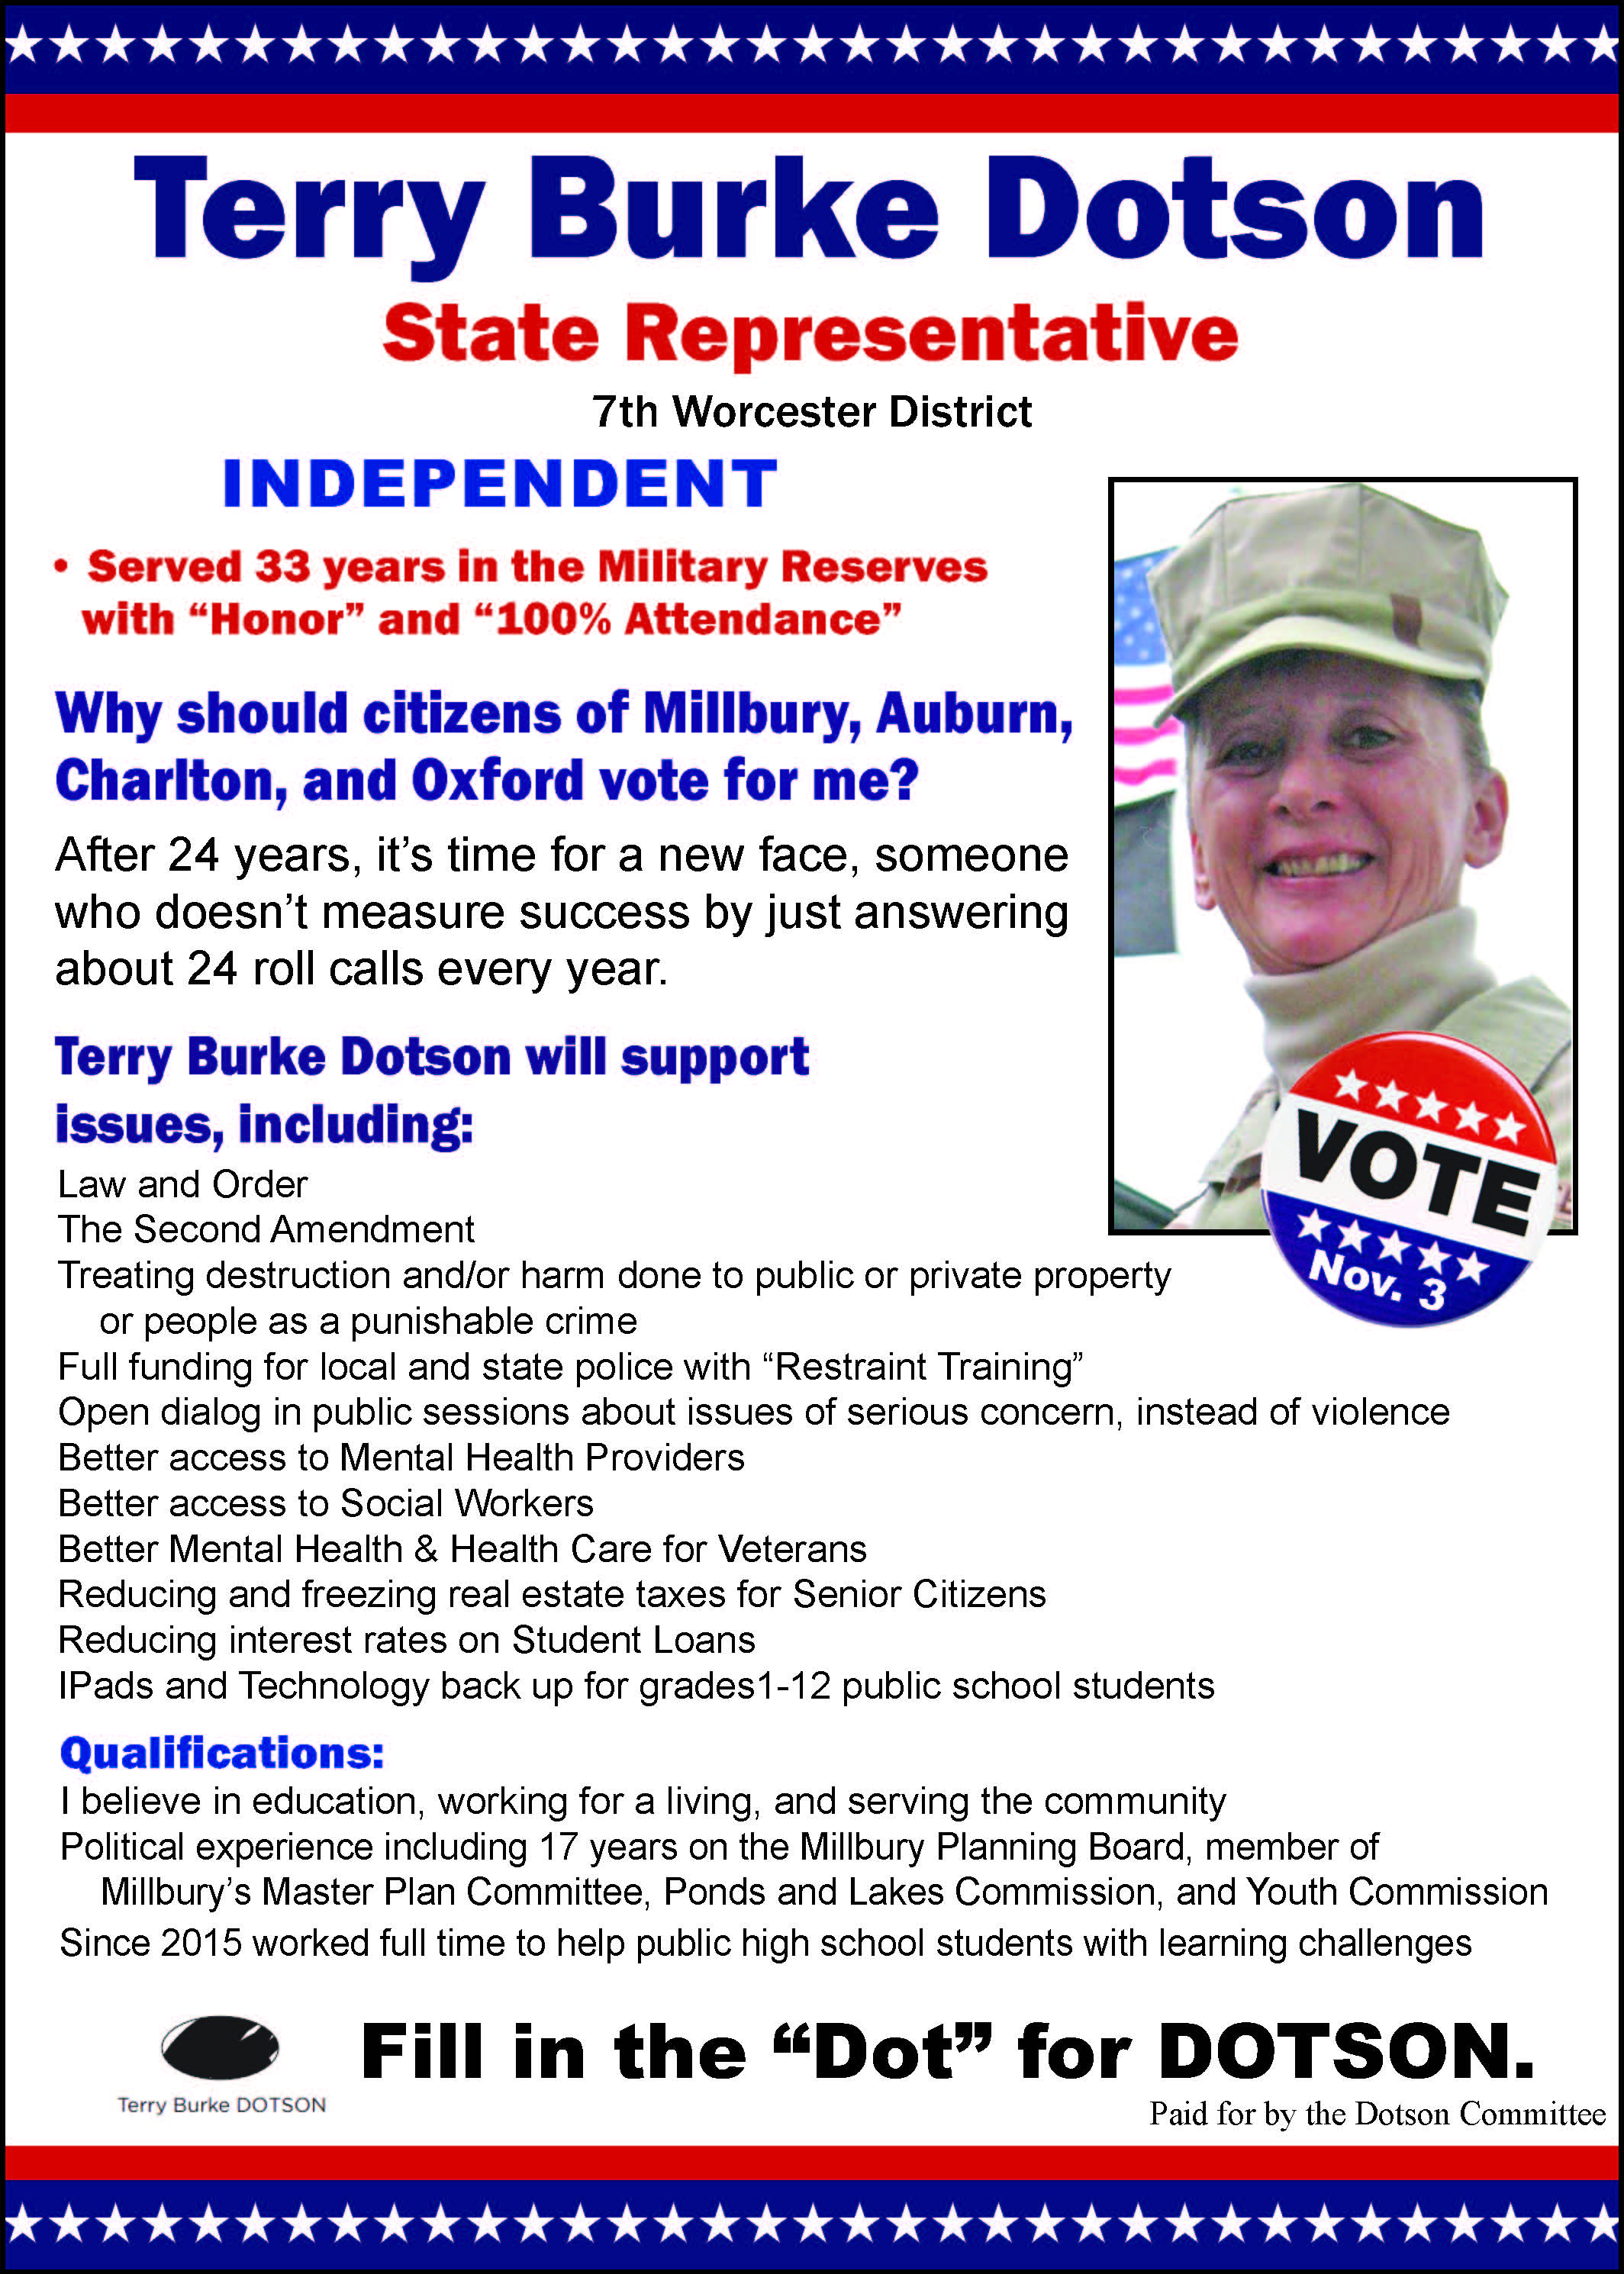 Terry Burke Dotson - Independent for Massachusetts State Rep